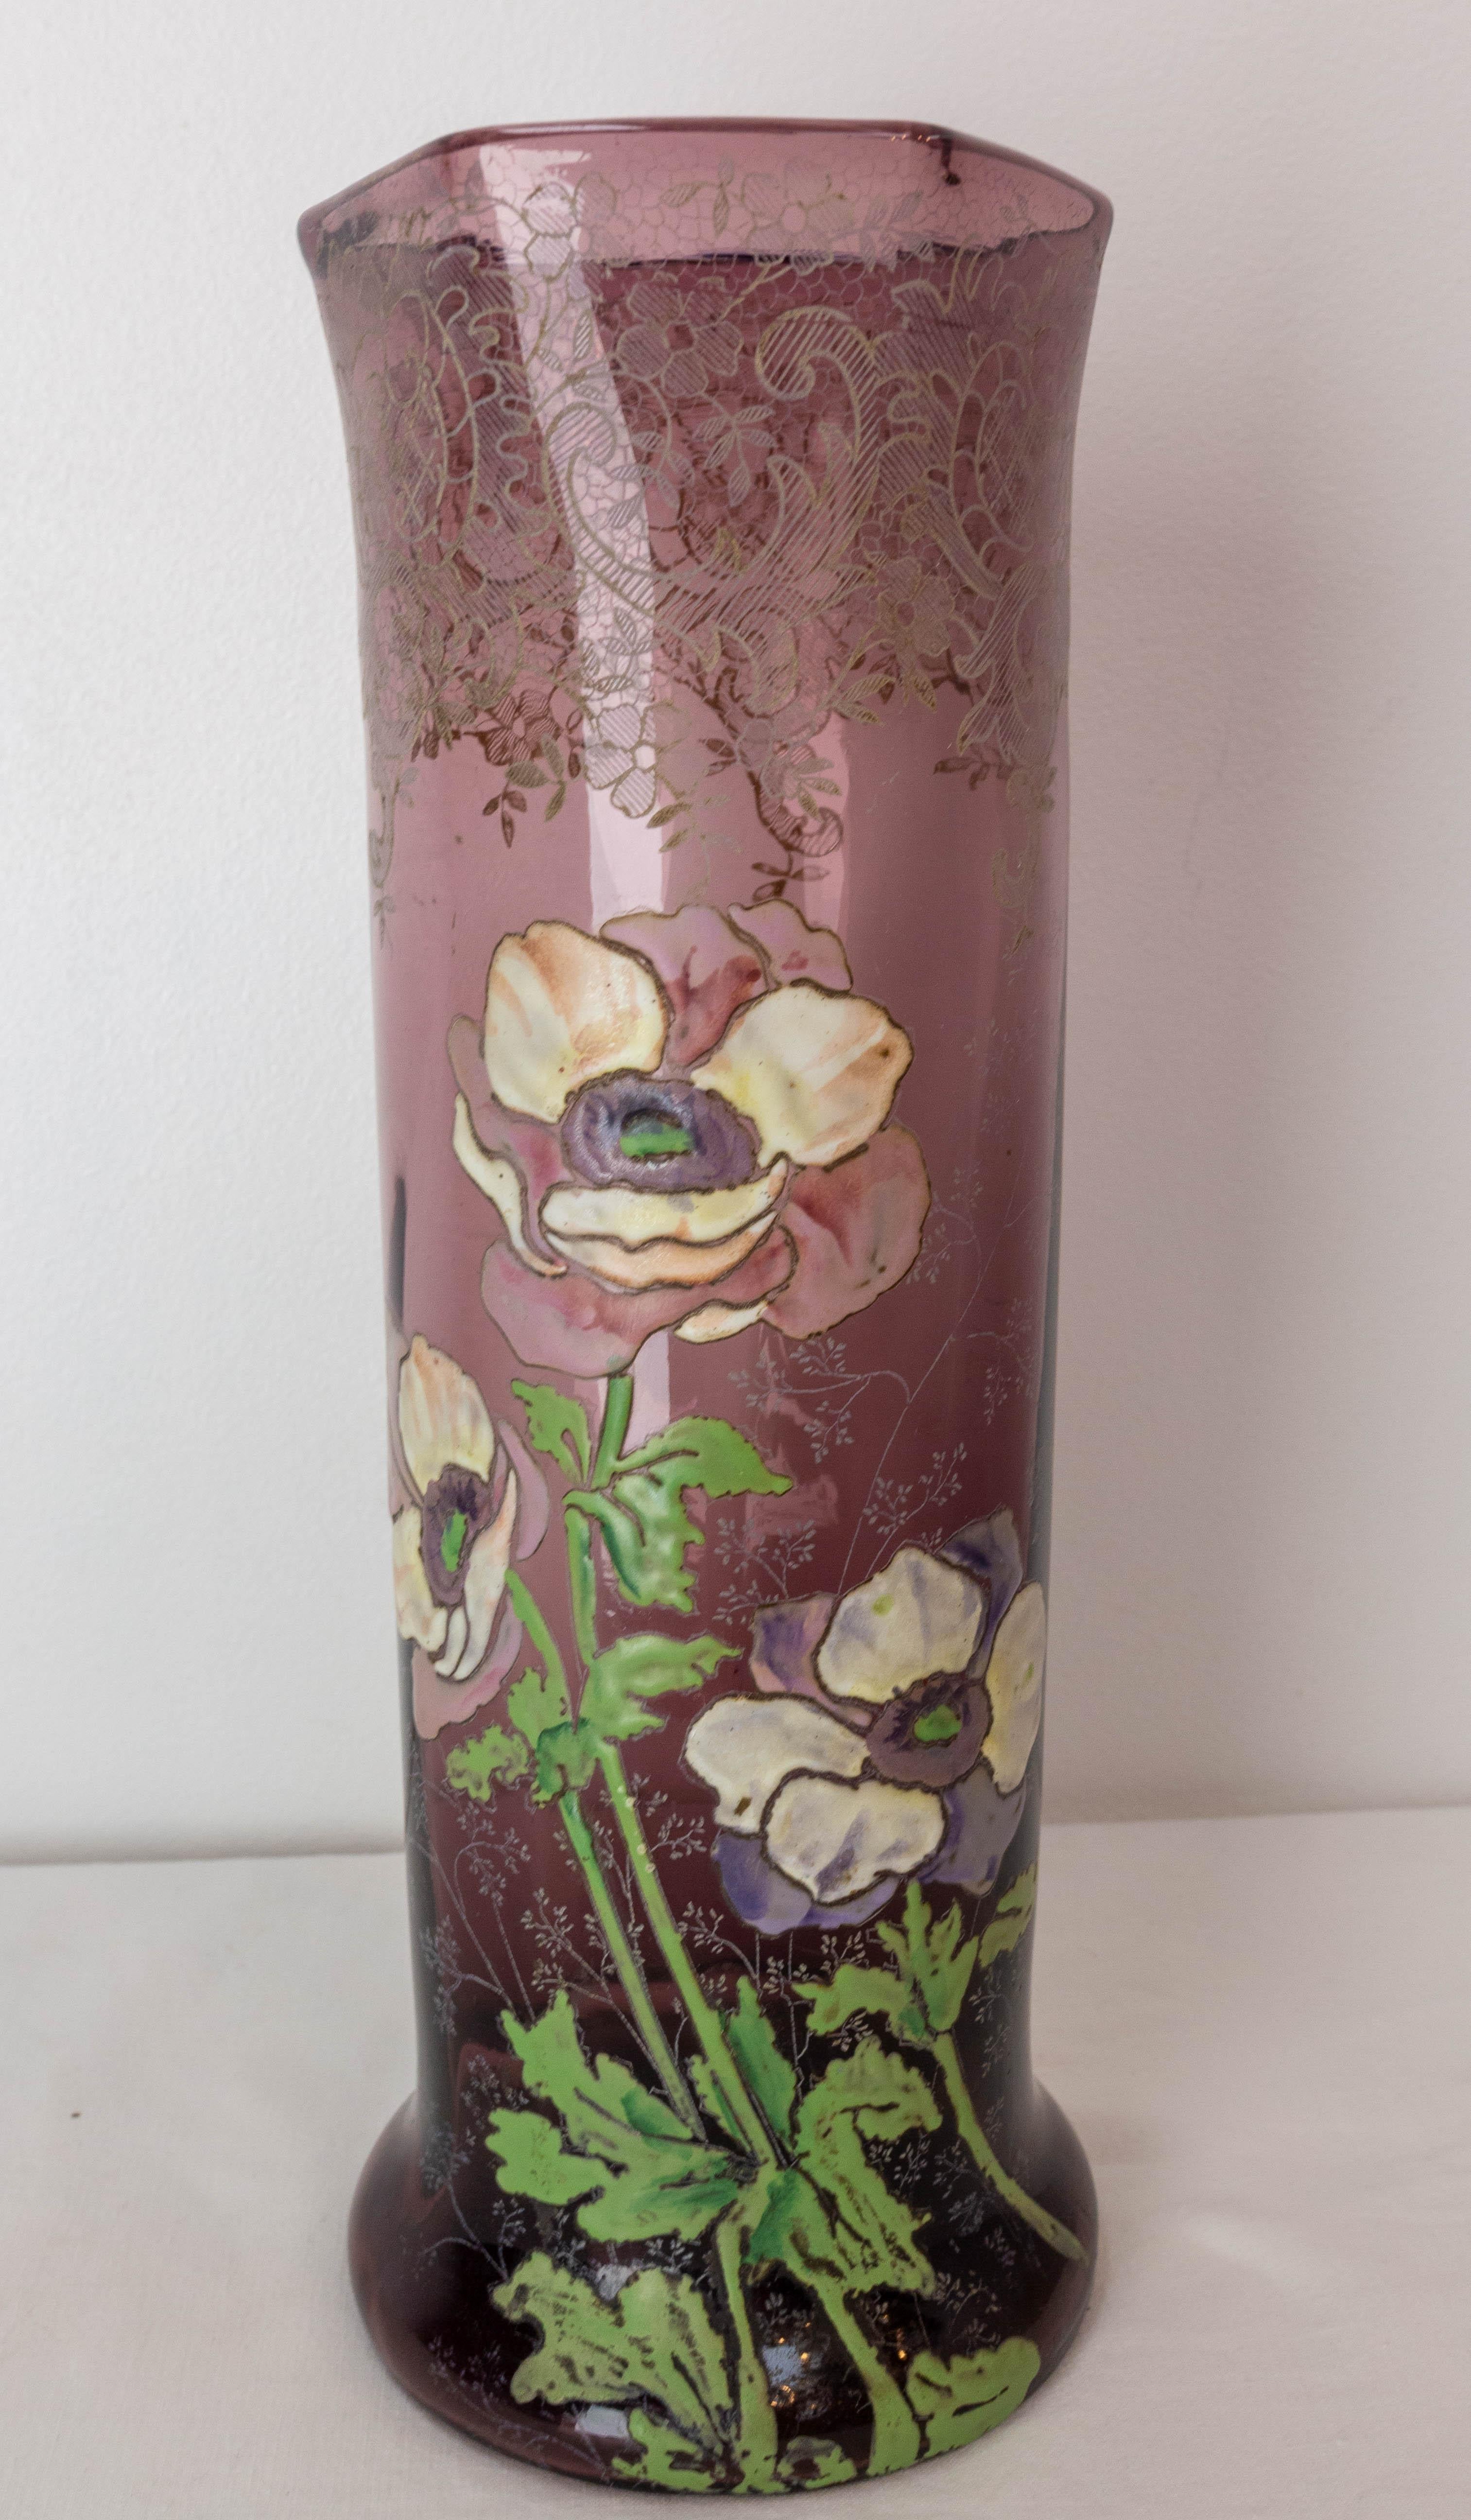 French purple glass vase
Hand painted enameled floral decor. Anemone flowers from François-Théodore Legras
The top of the vase is decorated with floral arabesques
Hexagonal vase neck.

Shipping:
D 10,5 H 32, 1 kg.